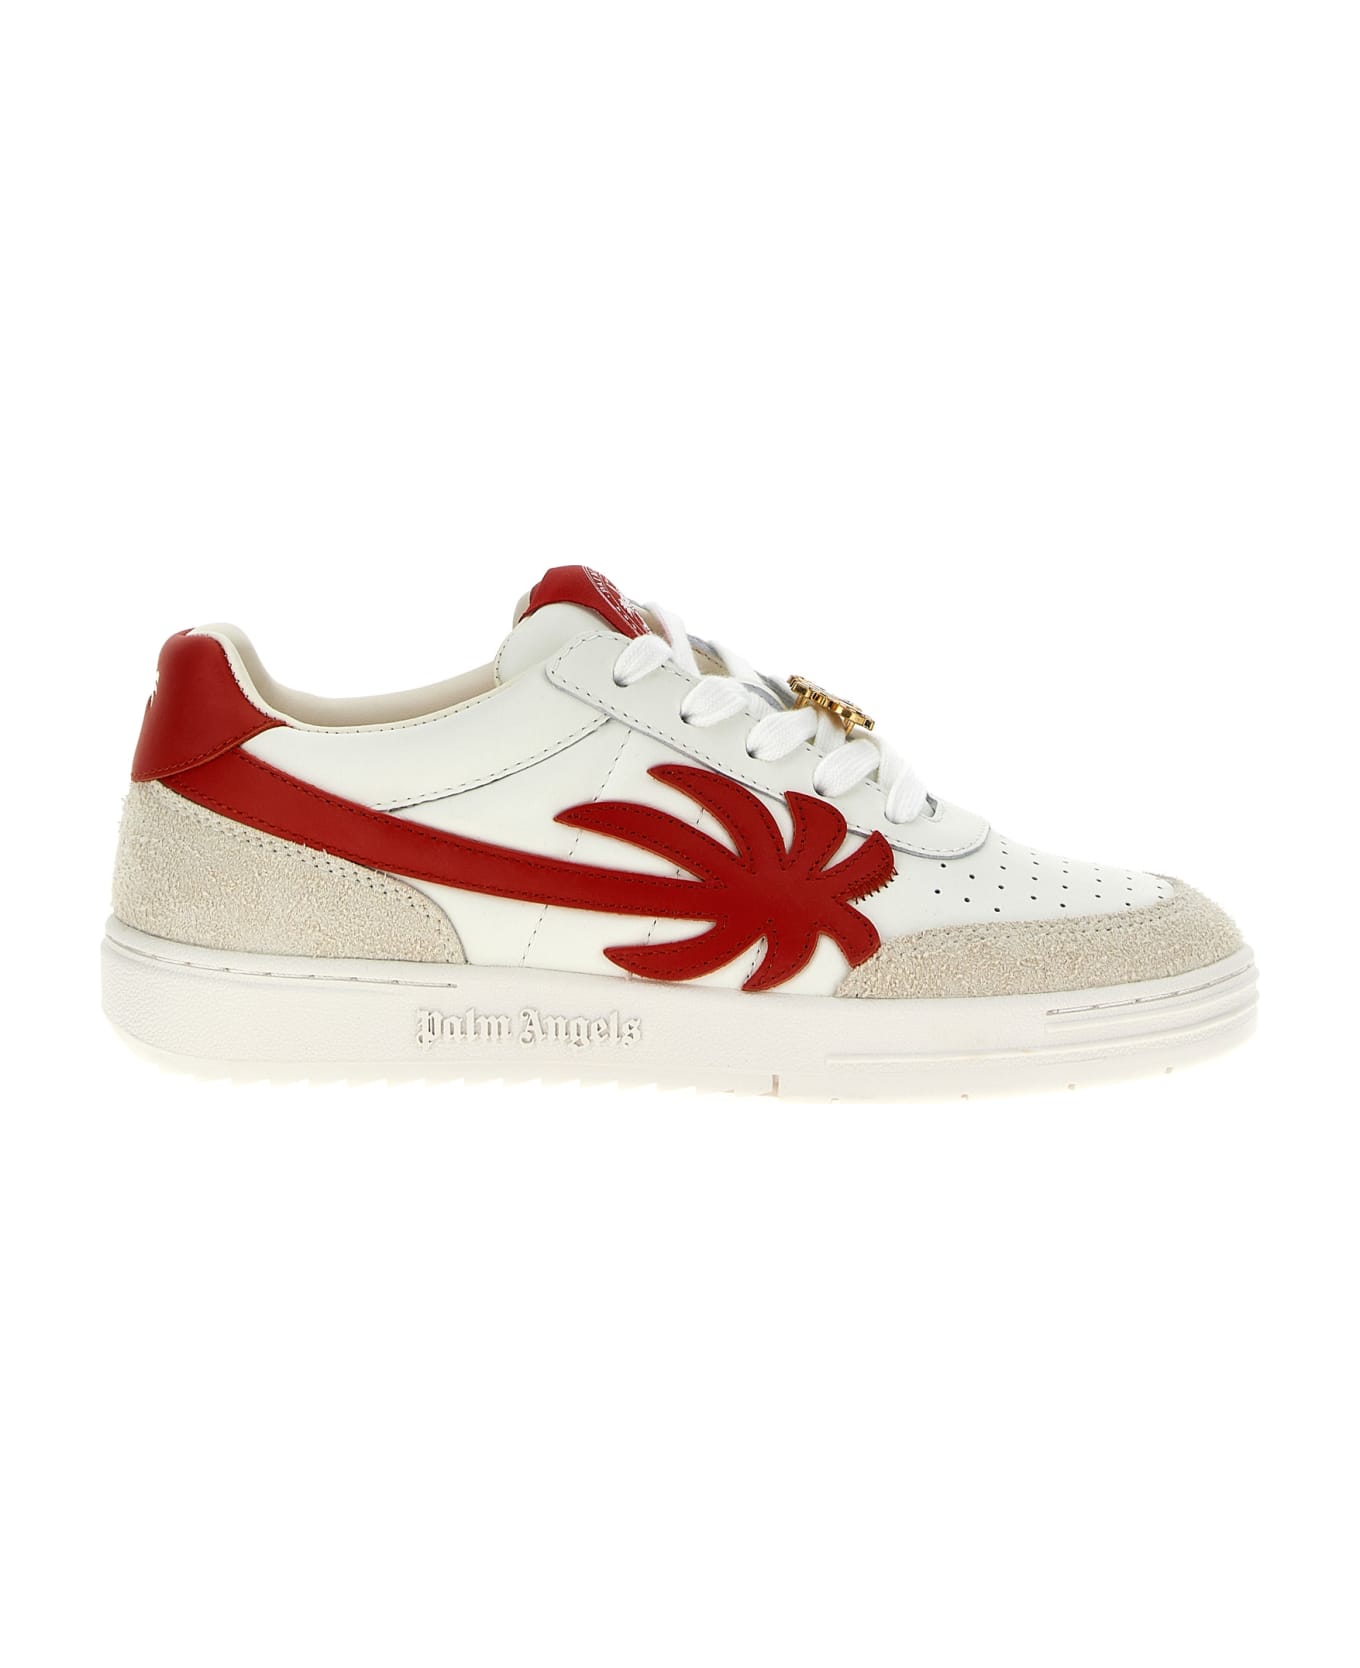 Palm Angels Palm Beach University Sneakers - Red